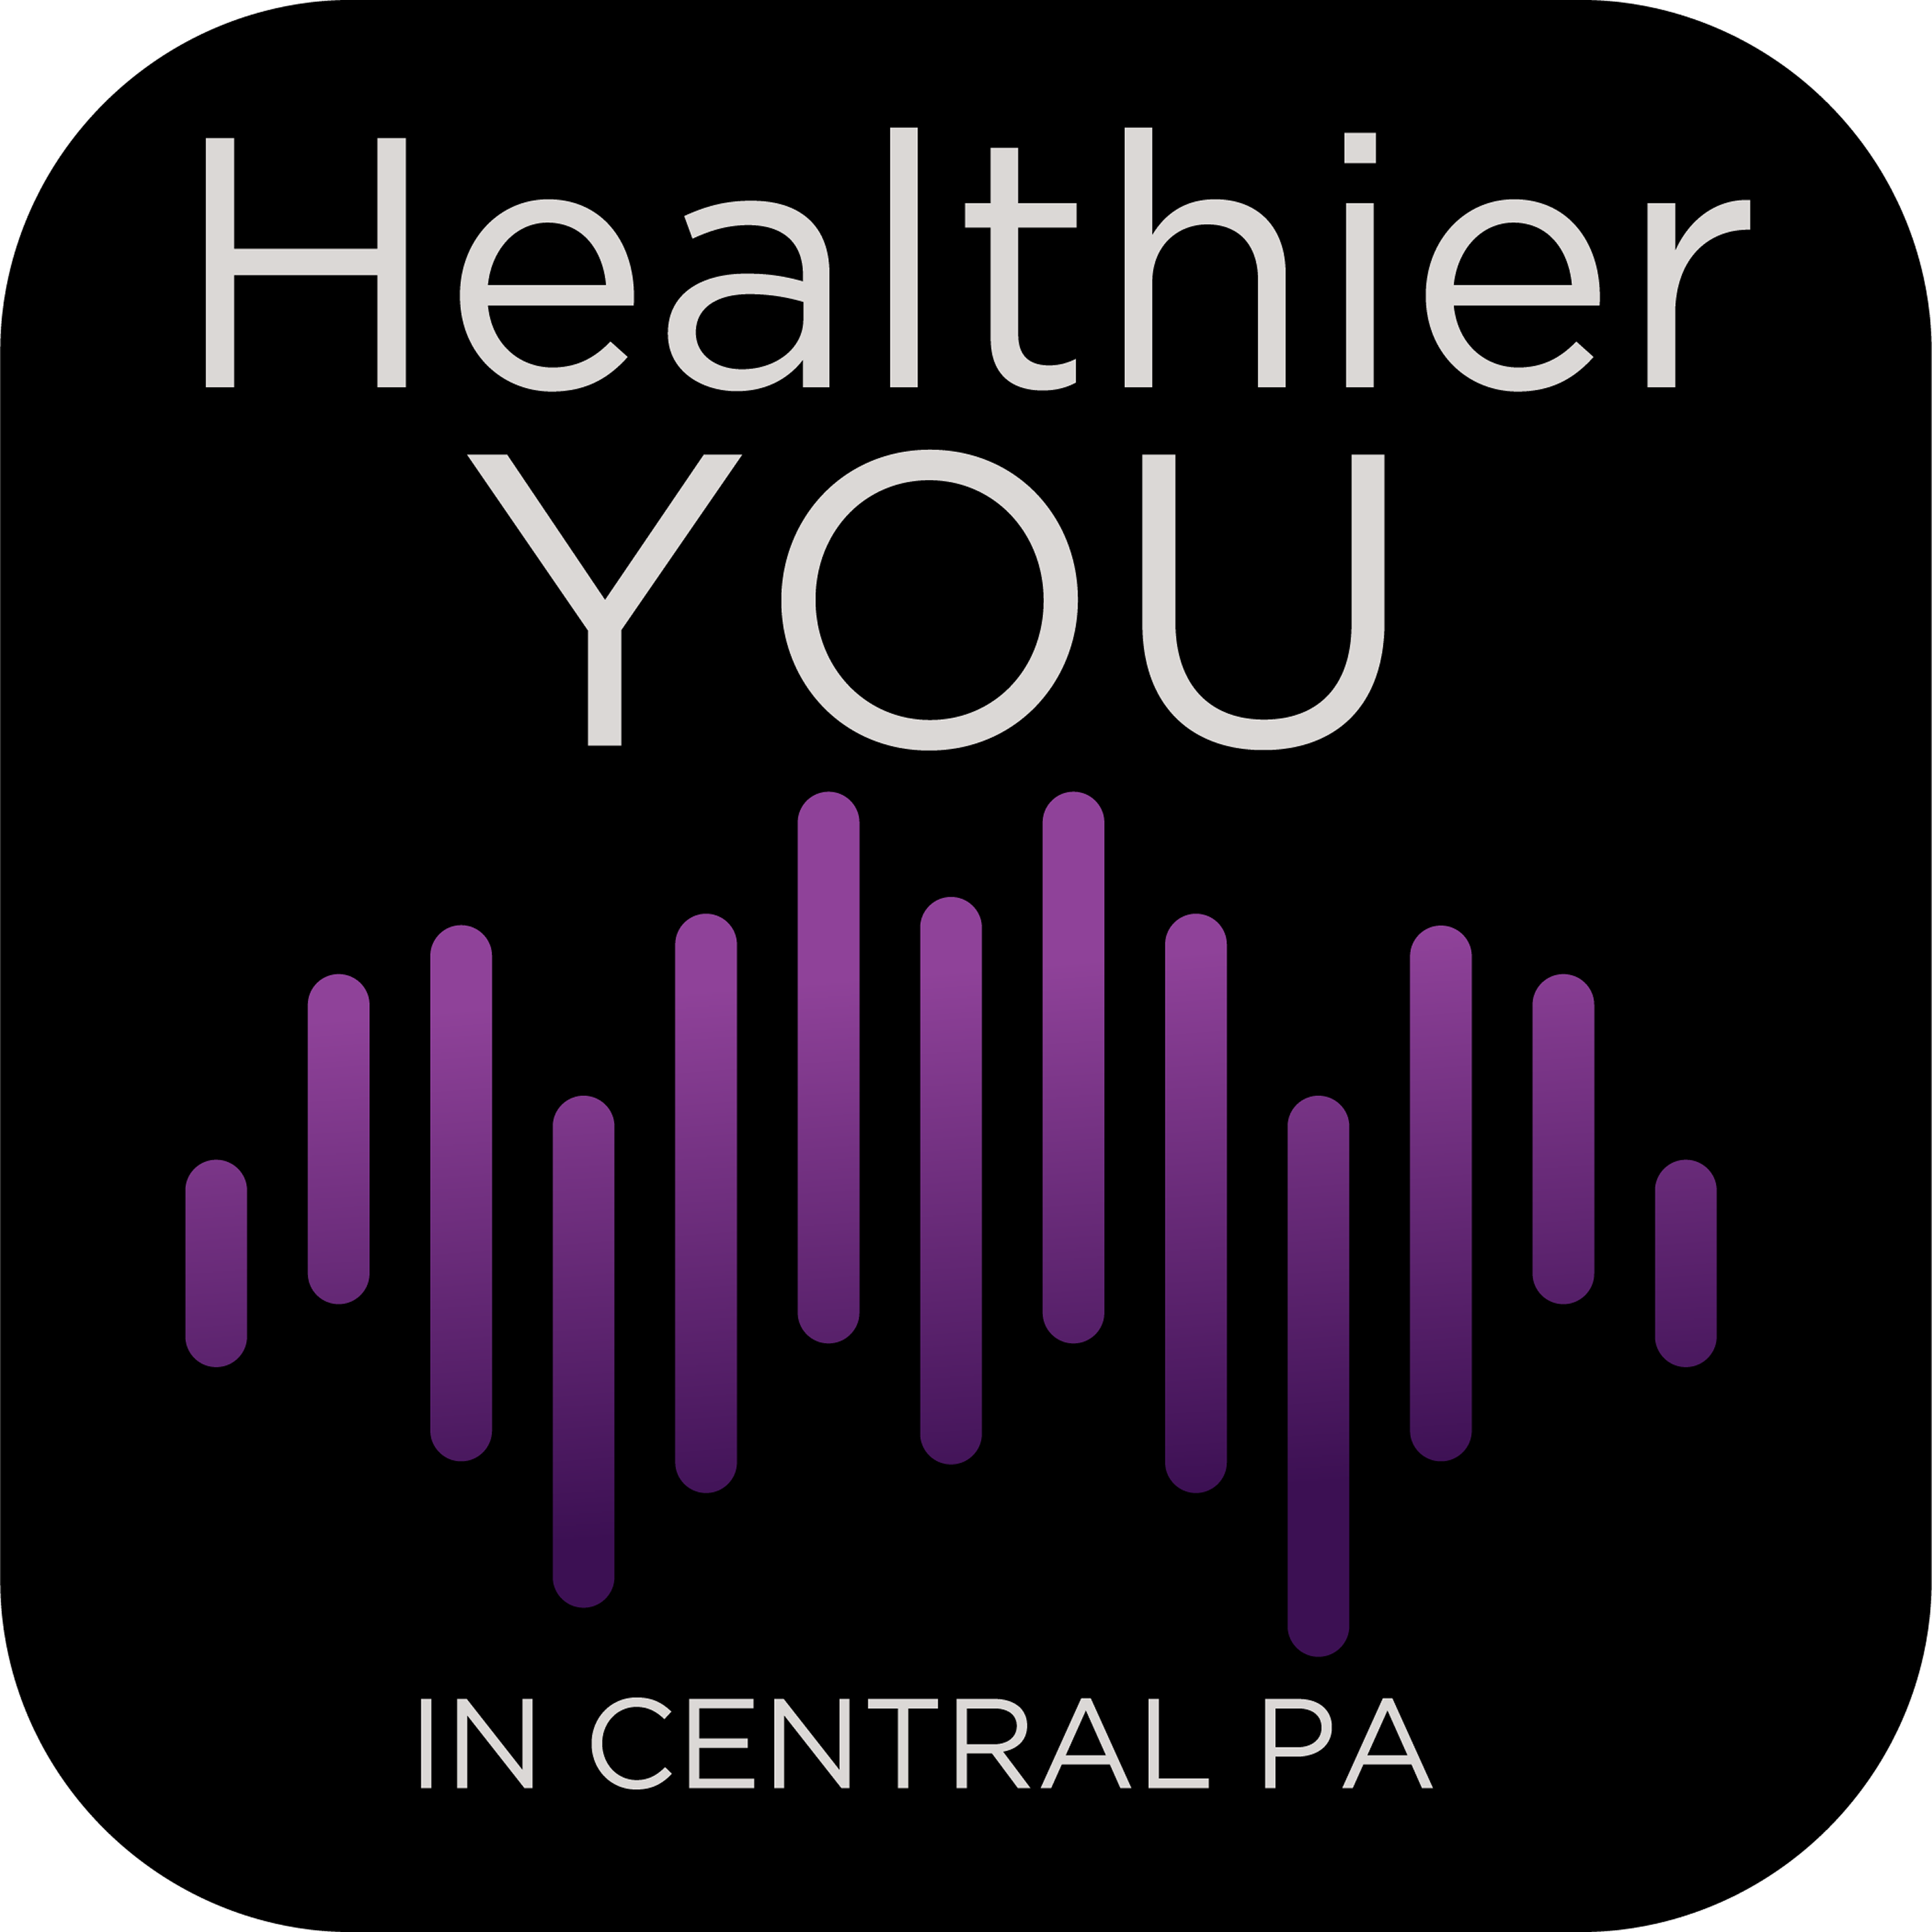 Healthier YOU - the podcast from UPMC in Central PA